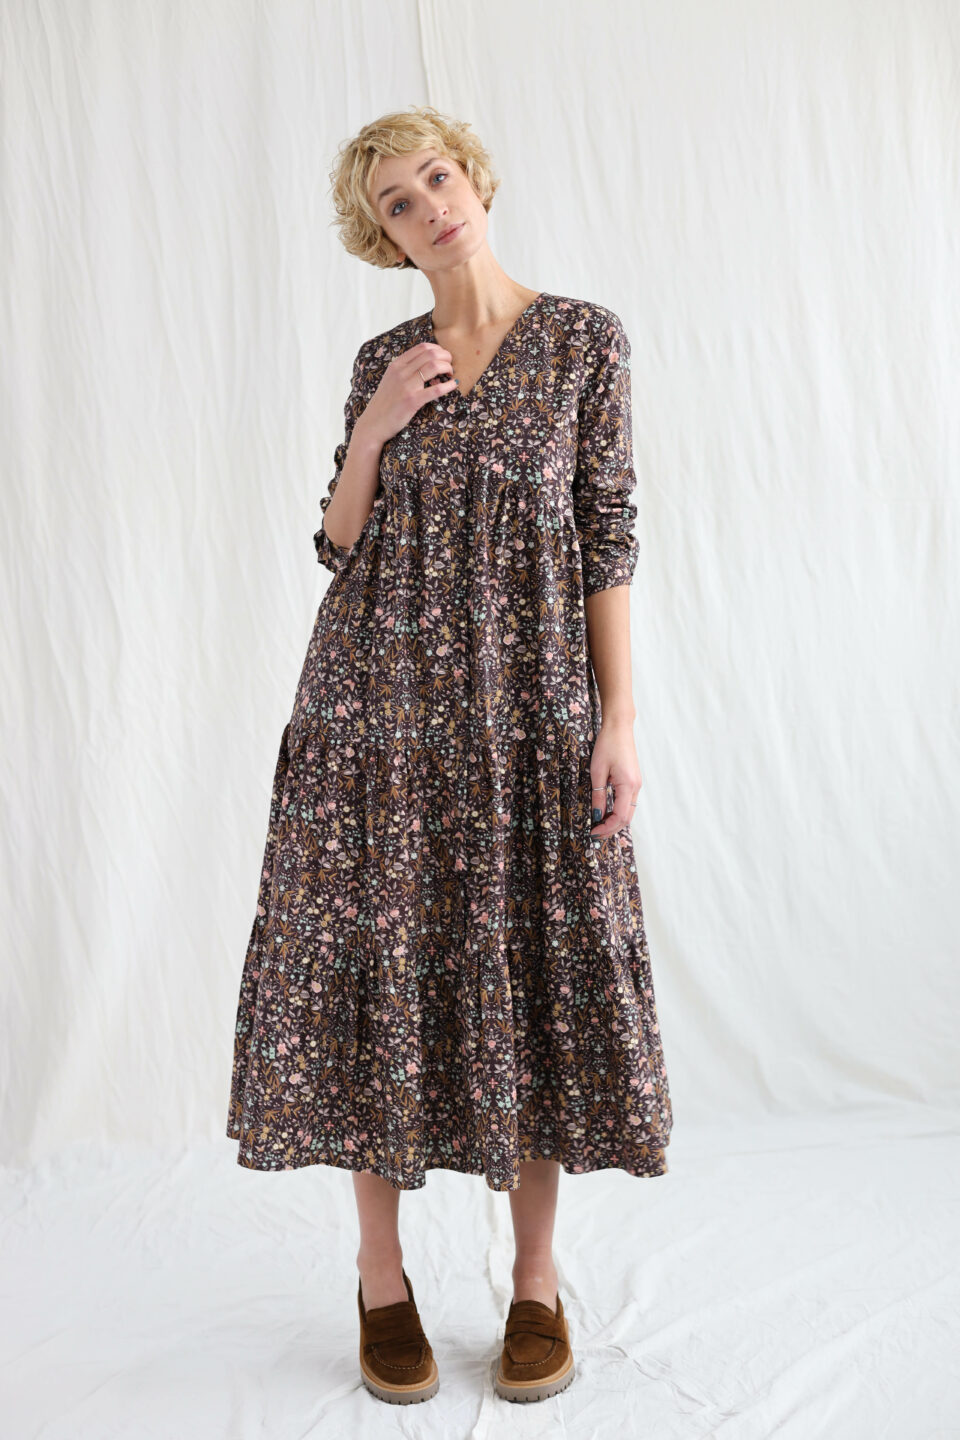 Floral tiered dress | Dress | Floral | Sustainable clothing | OffOn clothing